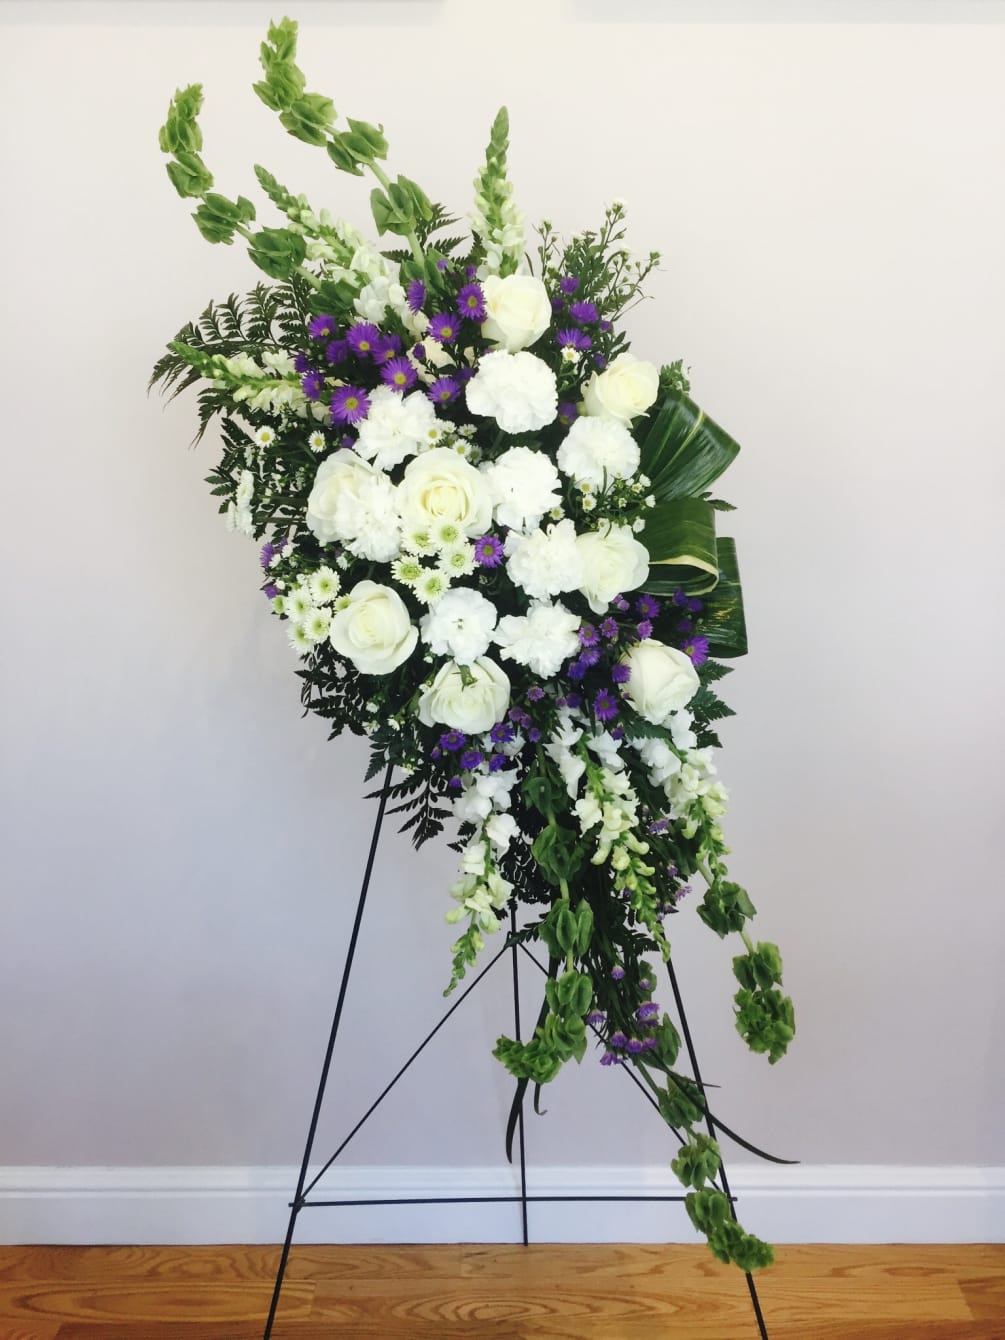 White roses, monte cassino, snapdragon, bells of Ireland and more designed for